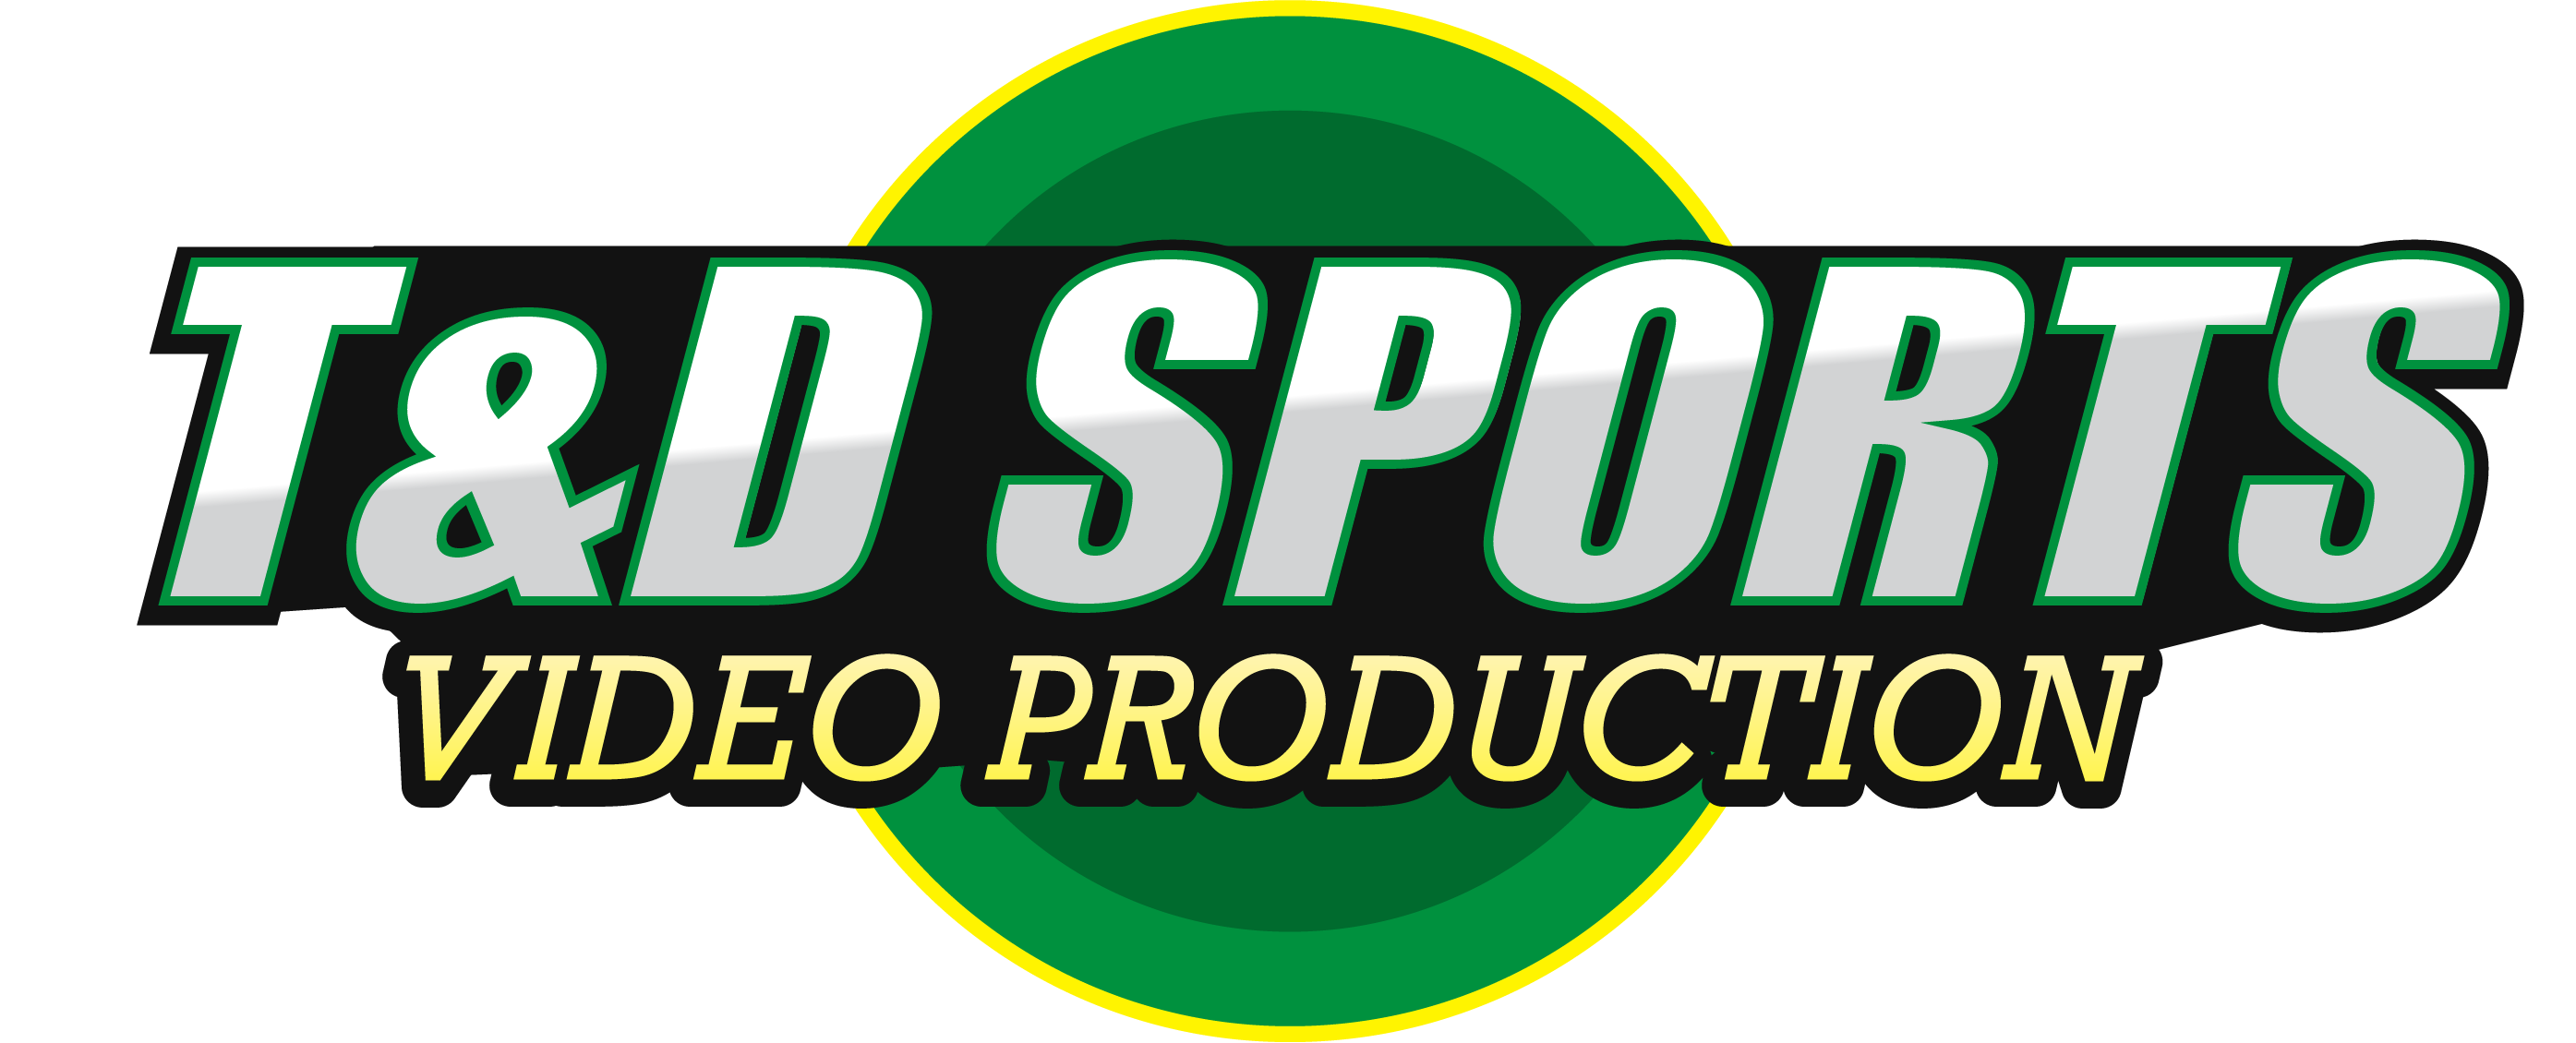 T & D Sports Video Productions